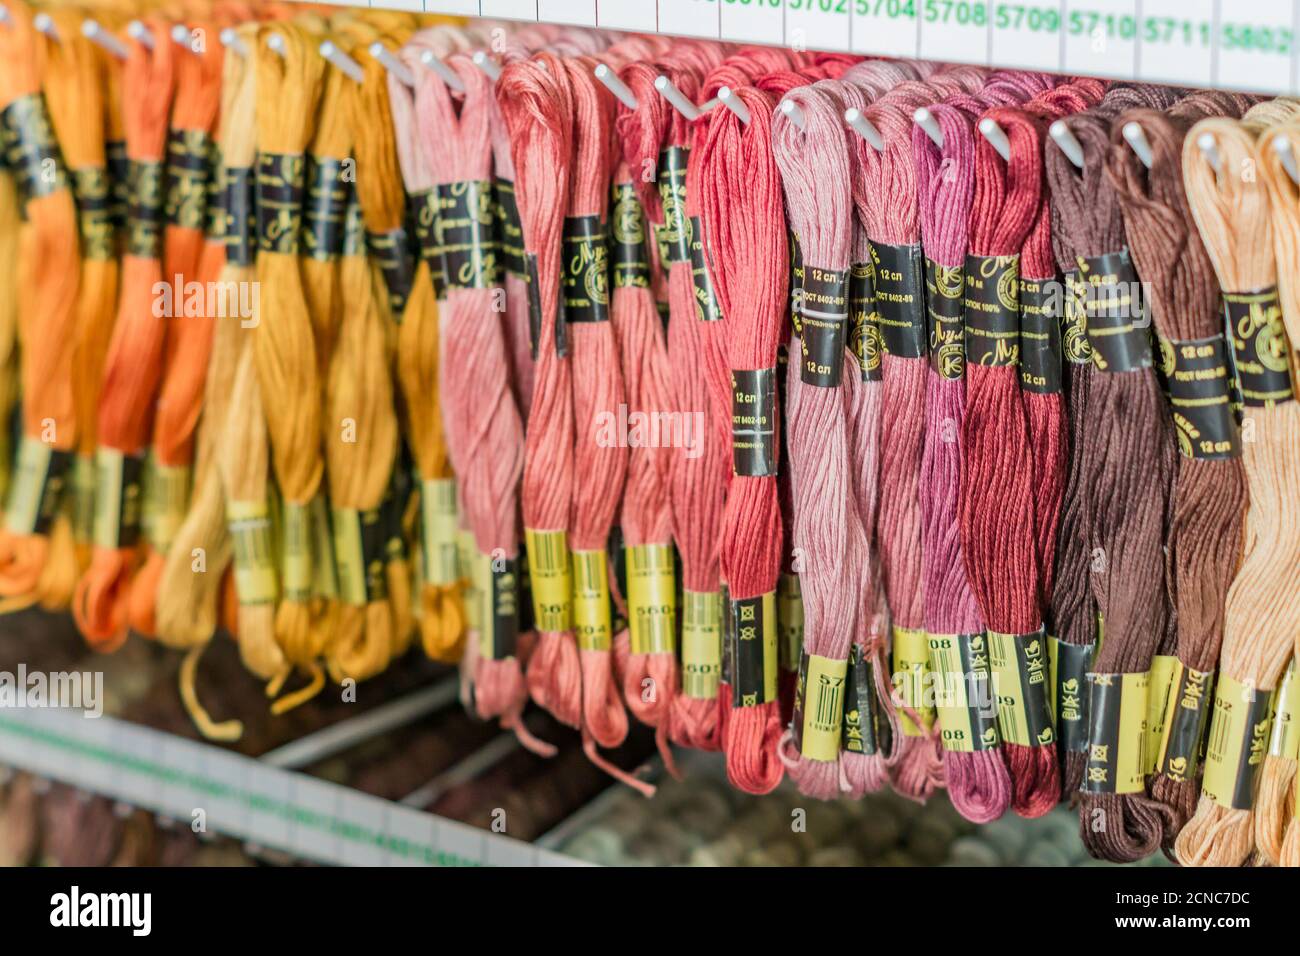 Moscow, Russia - February 14, 2019: Stend of Embroidery Floss in a shop. Colorfull textrure background Stock Photo